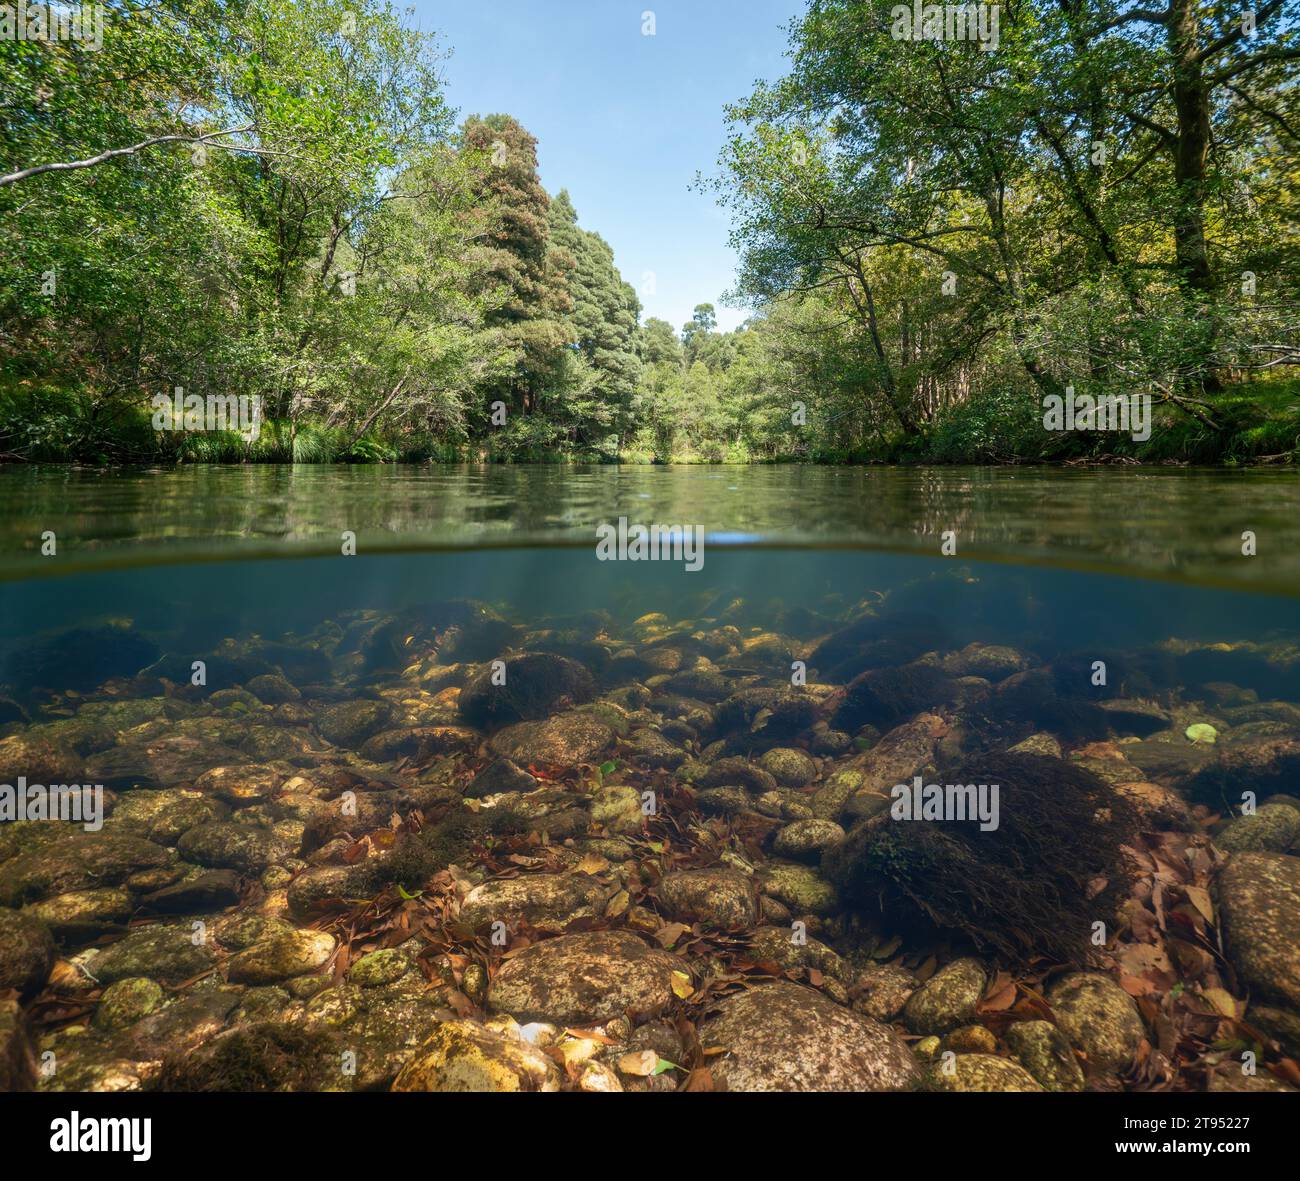 Wild river lined by trees with rocks underwater, split view over and under water surface, natural scene, Spain, Galicia, Pontevedra province Stock Photo